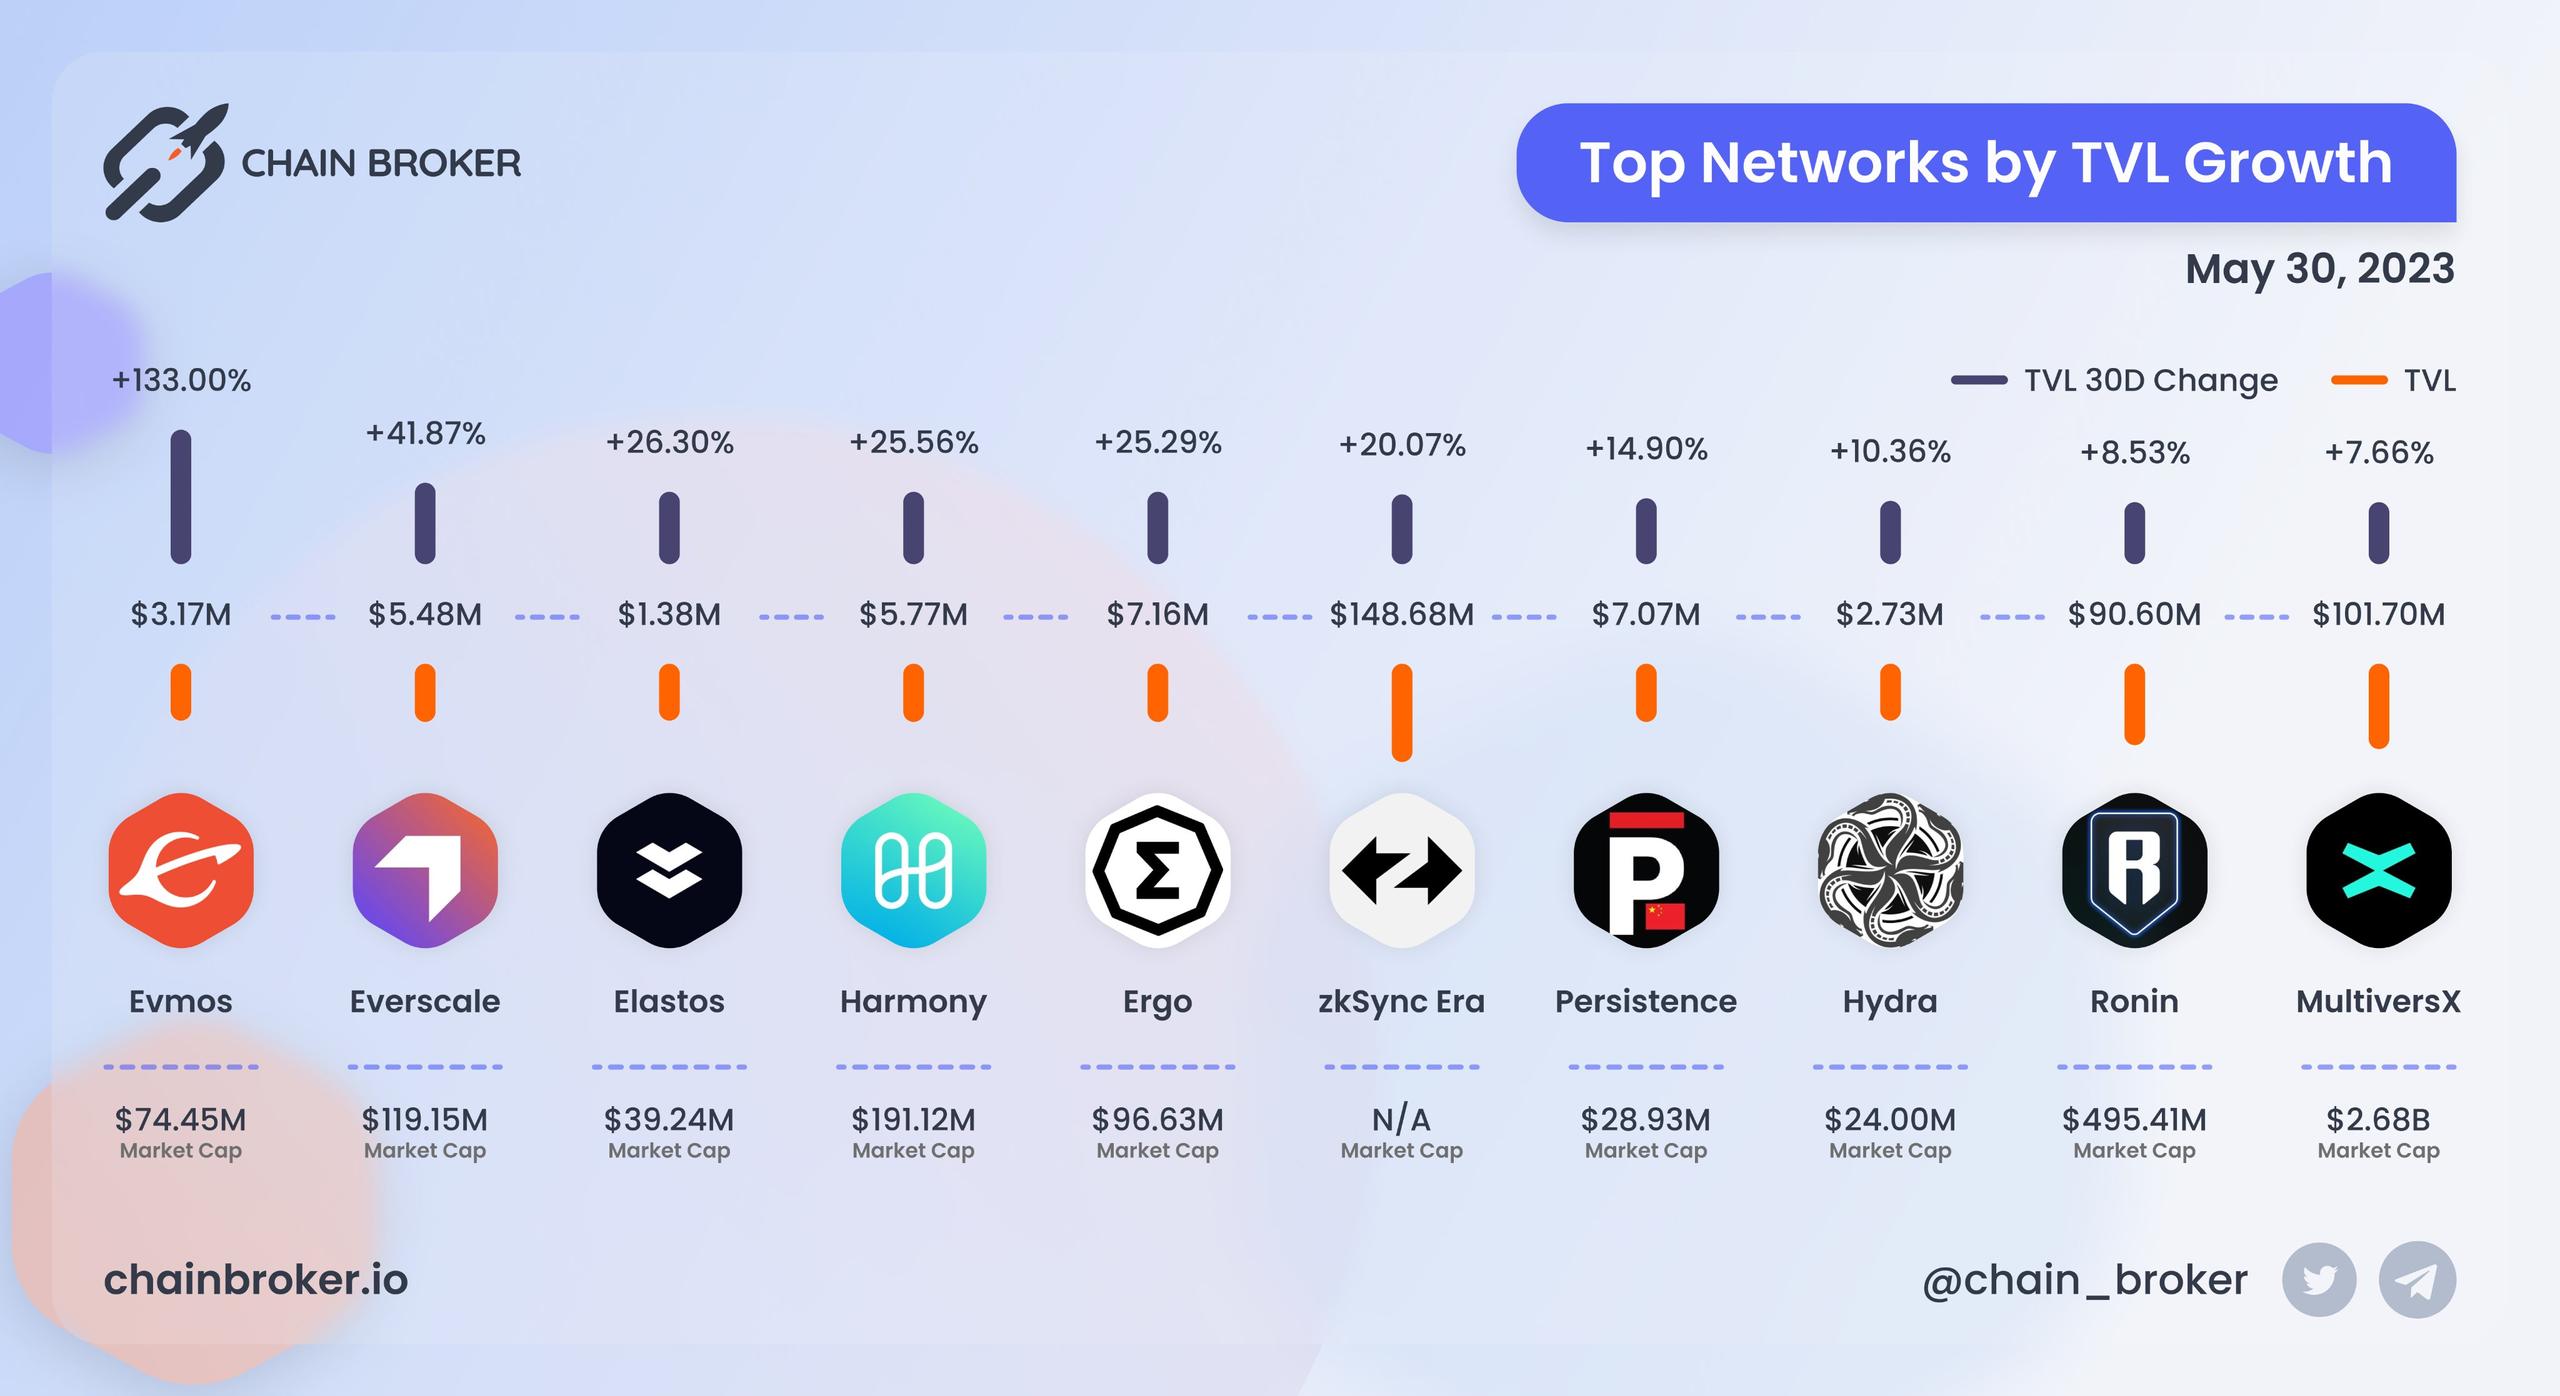 Top Networks by TVL growth